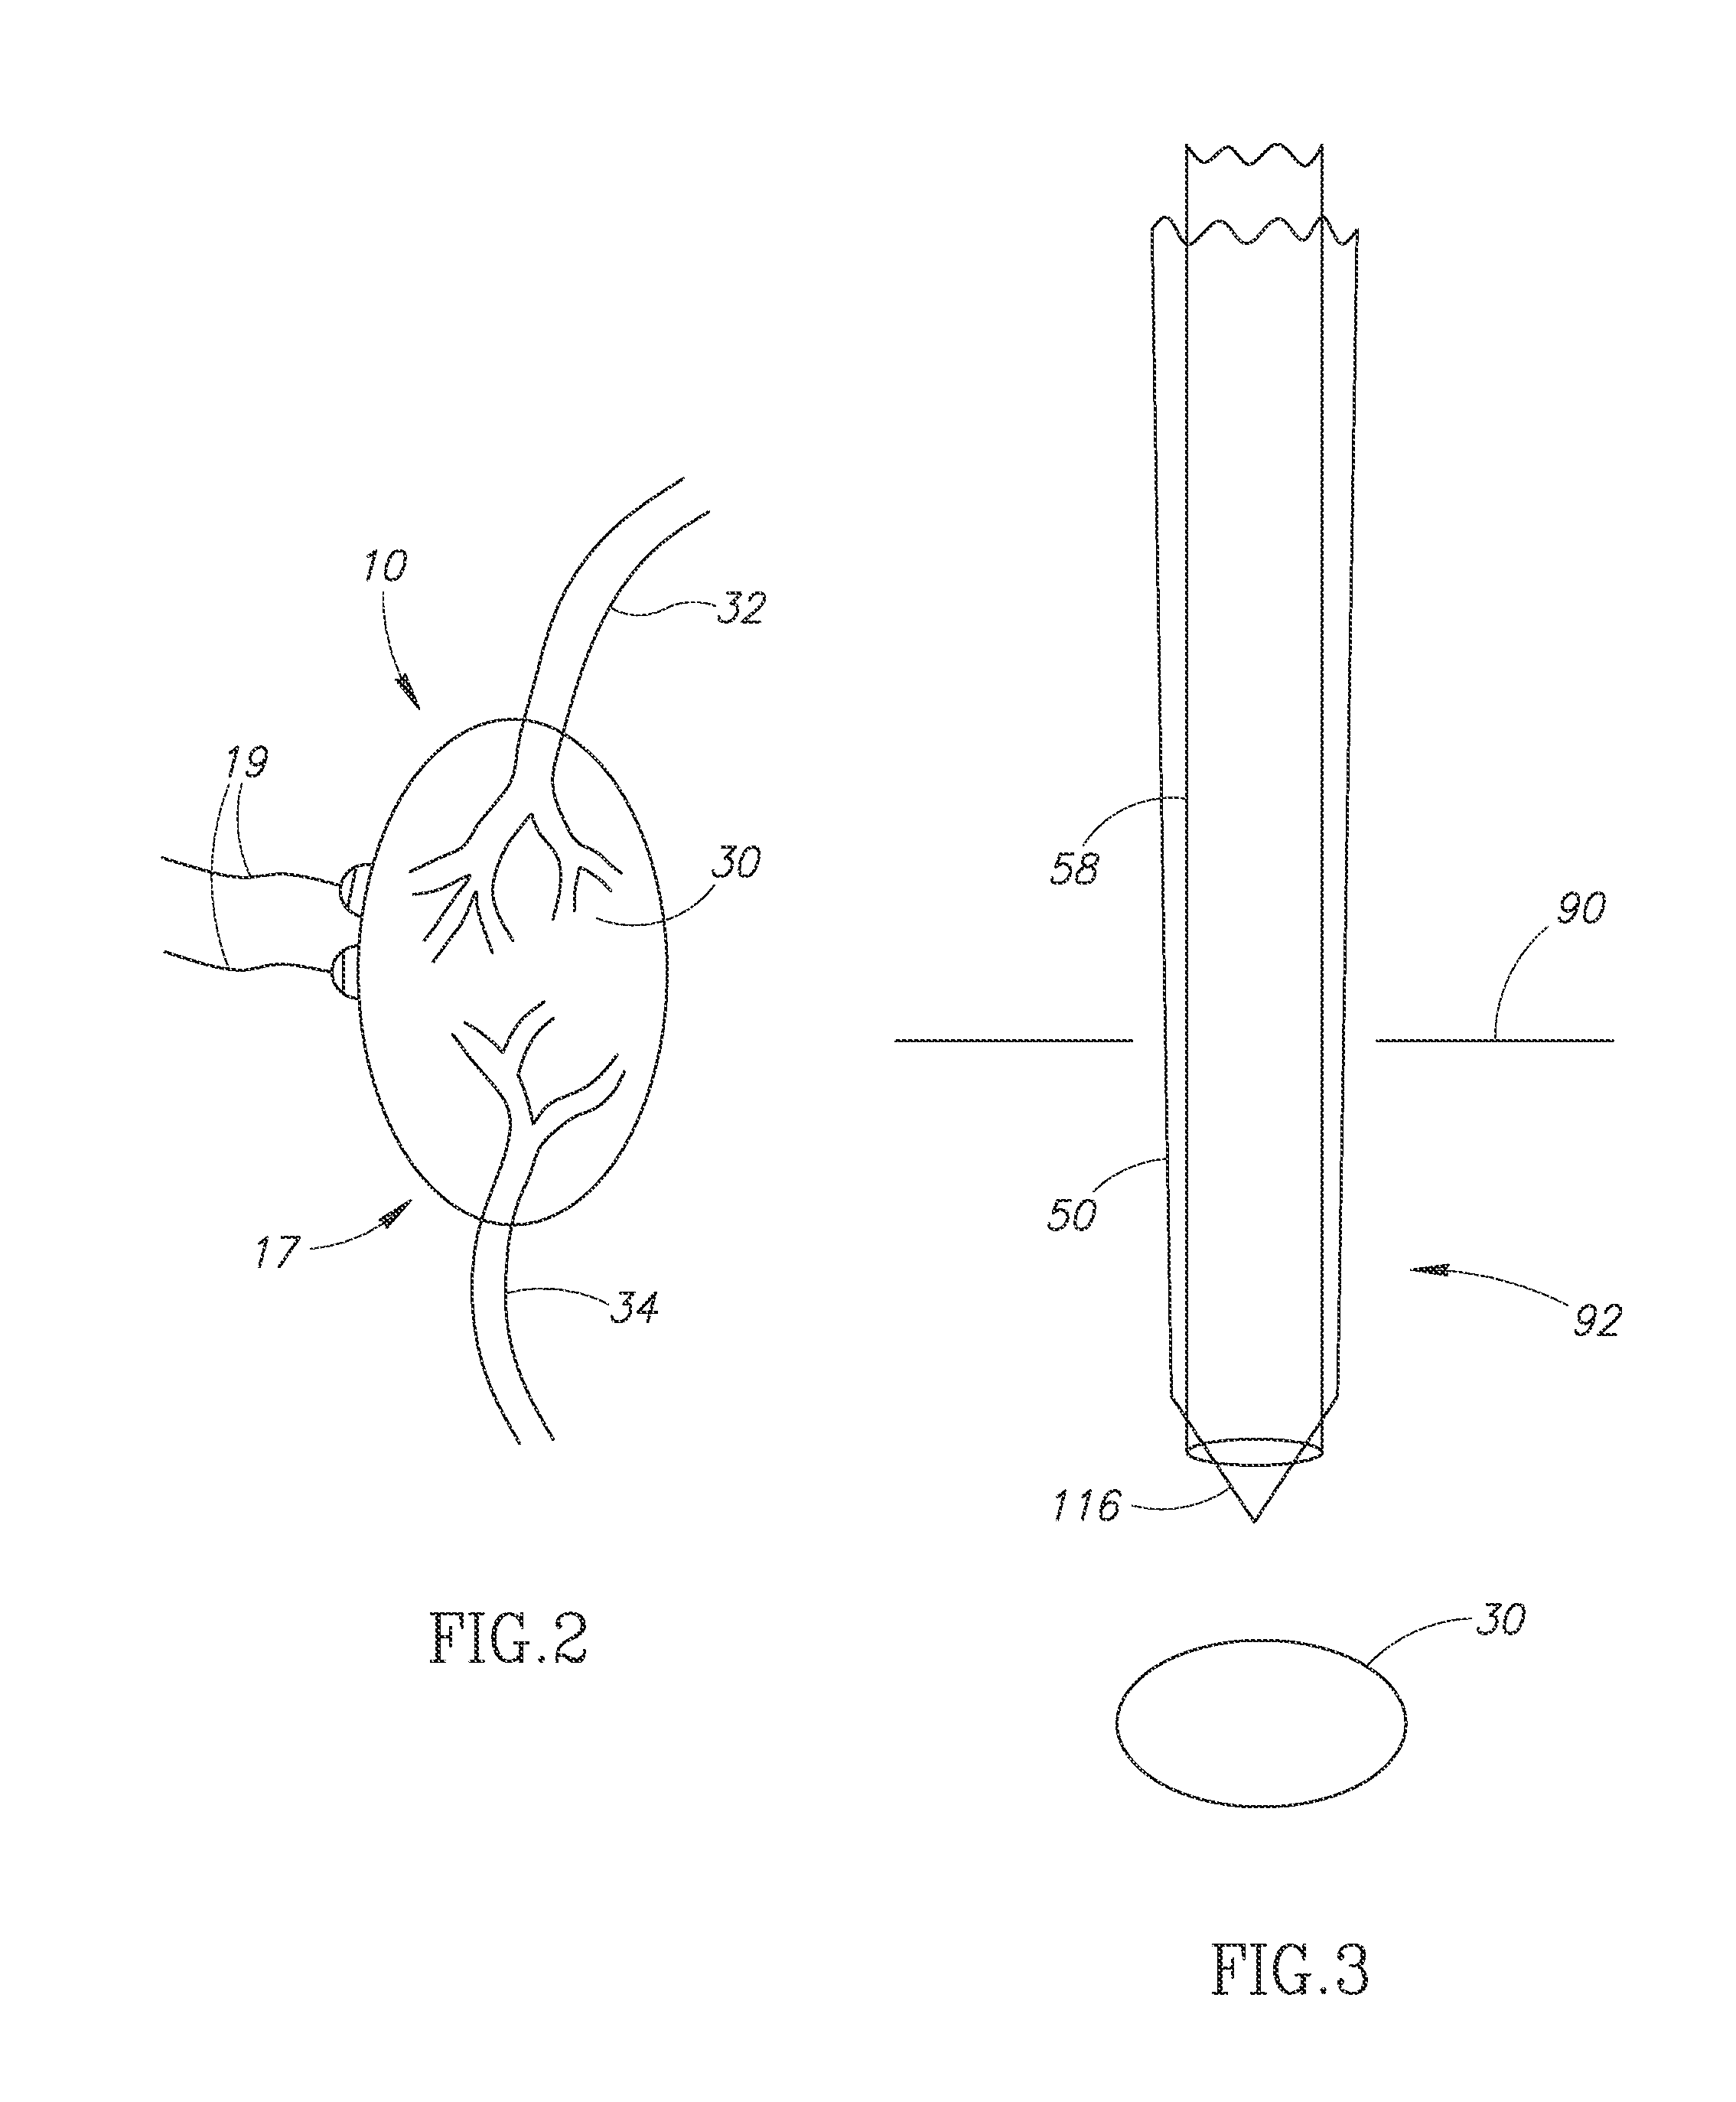 Non-invasive and minimally invasive and tightly targeted minimally invasive therapy methods and devices for parathyroid treatment